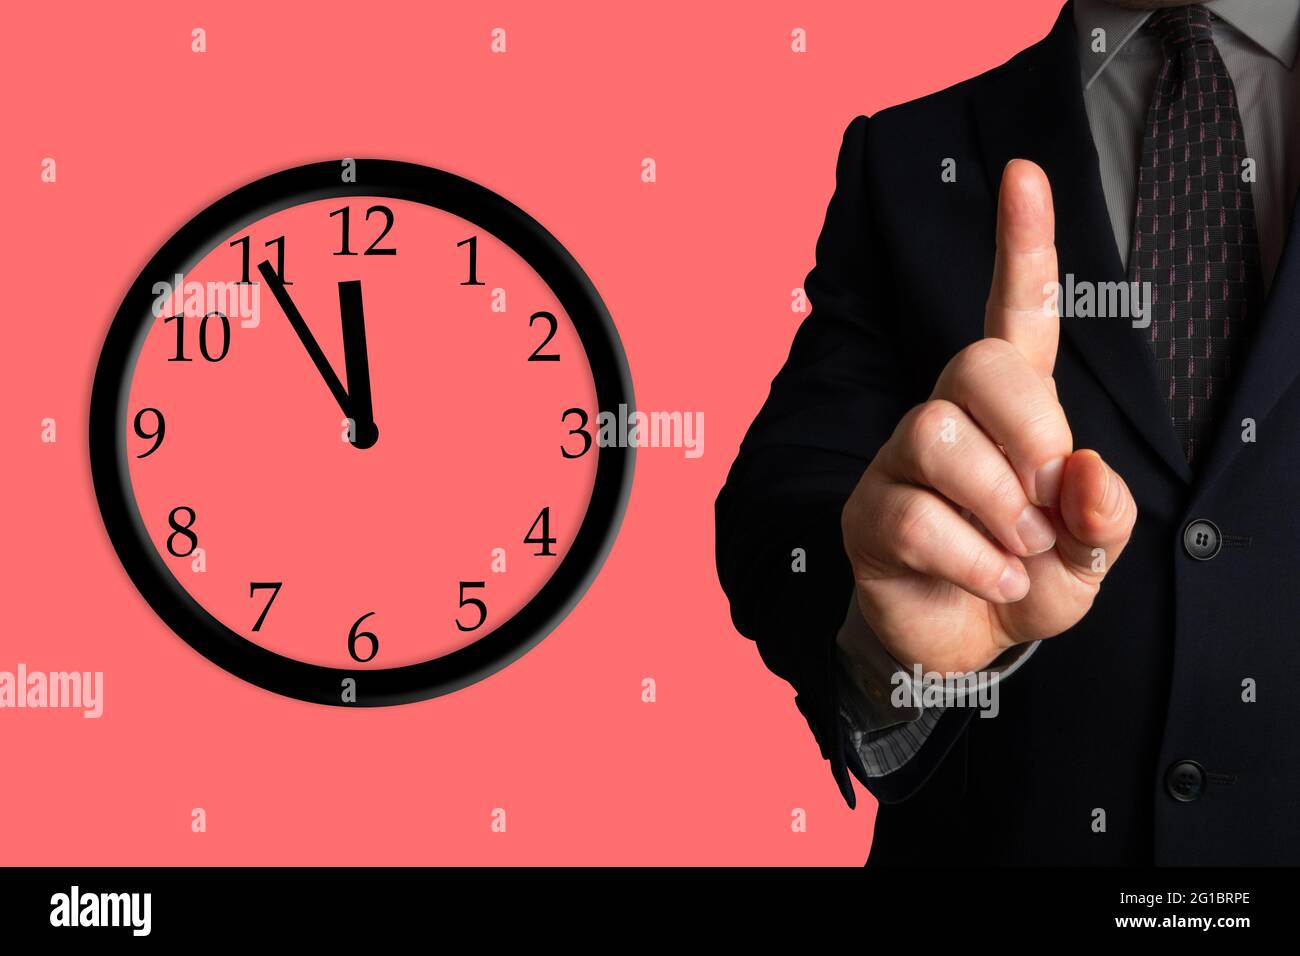 Manager raising his finger, pointing out that it's 5 minutes to 12. This symbolizes that it is high time to take action or call to action, attention. Stock Photo